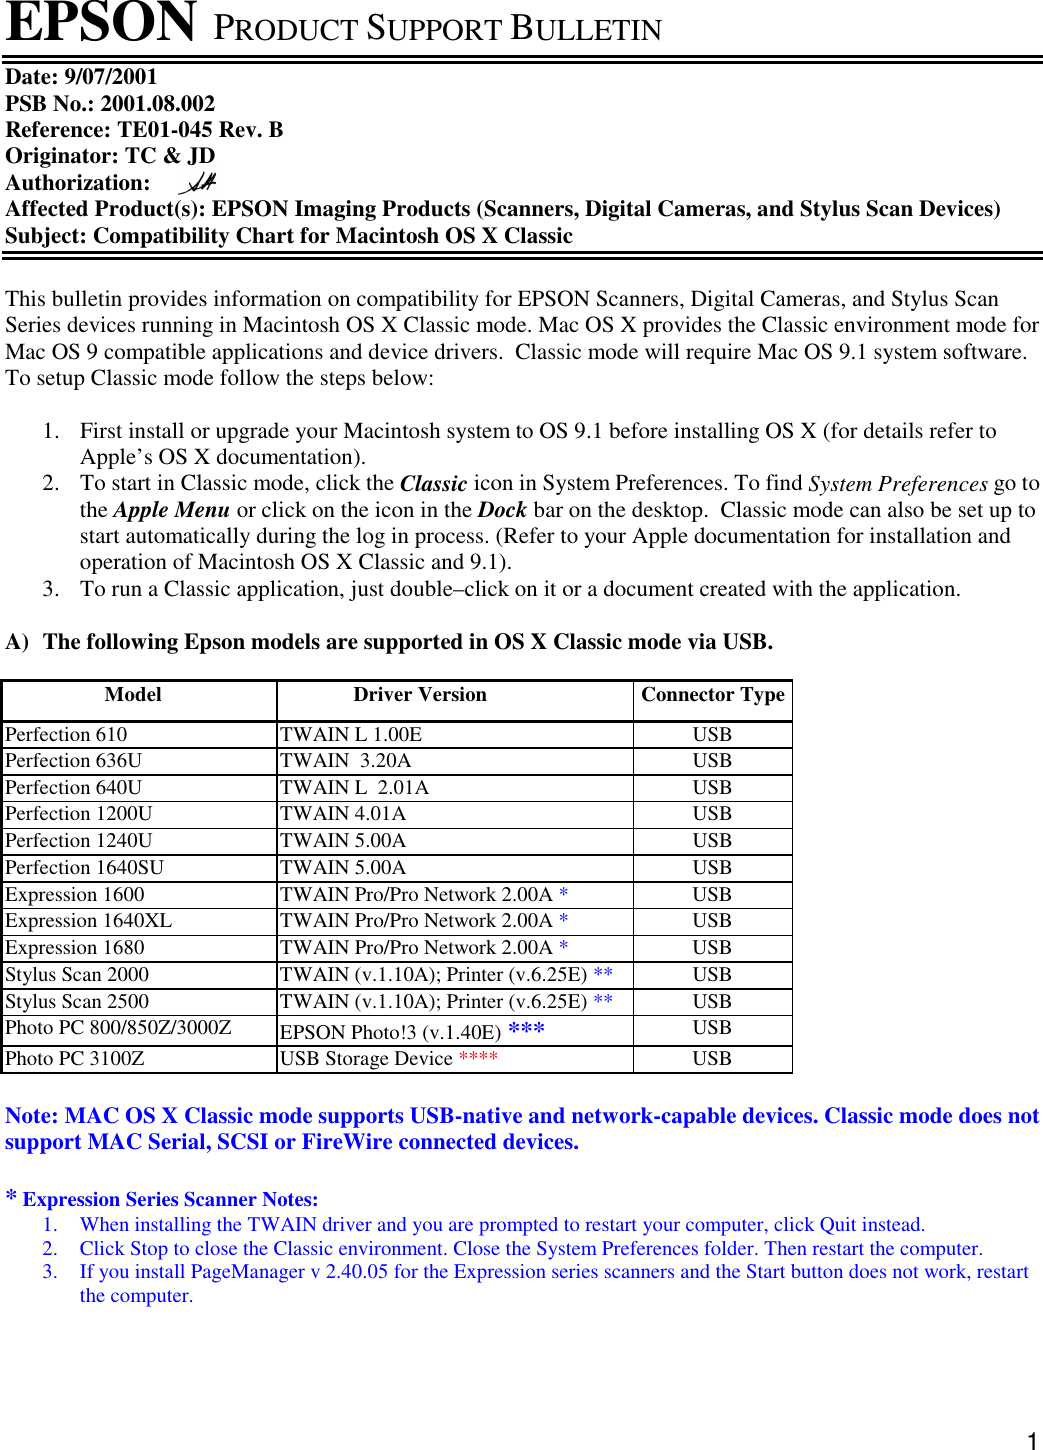 Page 6 of 7 - Epson Epson-Psb-2003-04-003-Users-Manual- Perfection 636U - Product Support Bulletin  Epson-psb-2003-04-003-users-manual